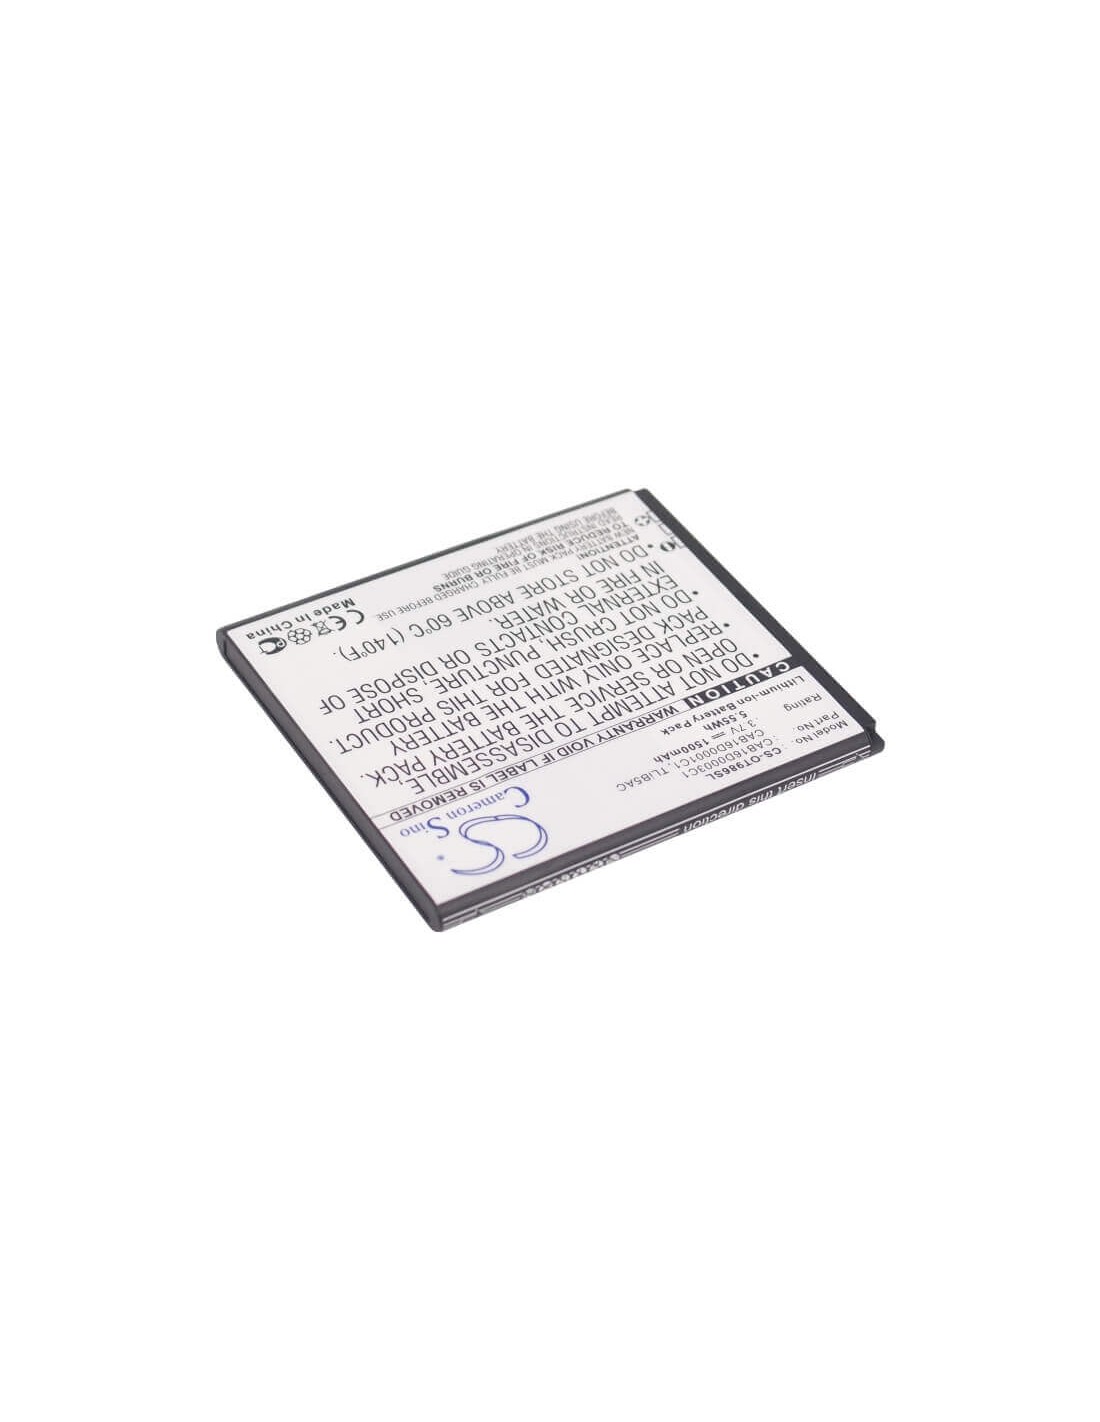 Battery for Alcatel OT-986, AK47, One Touch 986 3.7V, 1500mAh - 5.55Wh